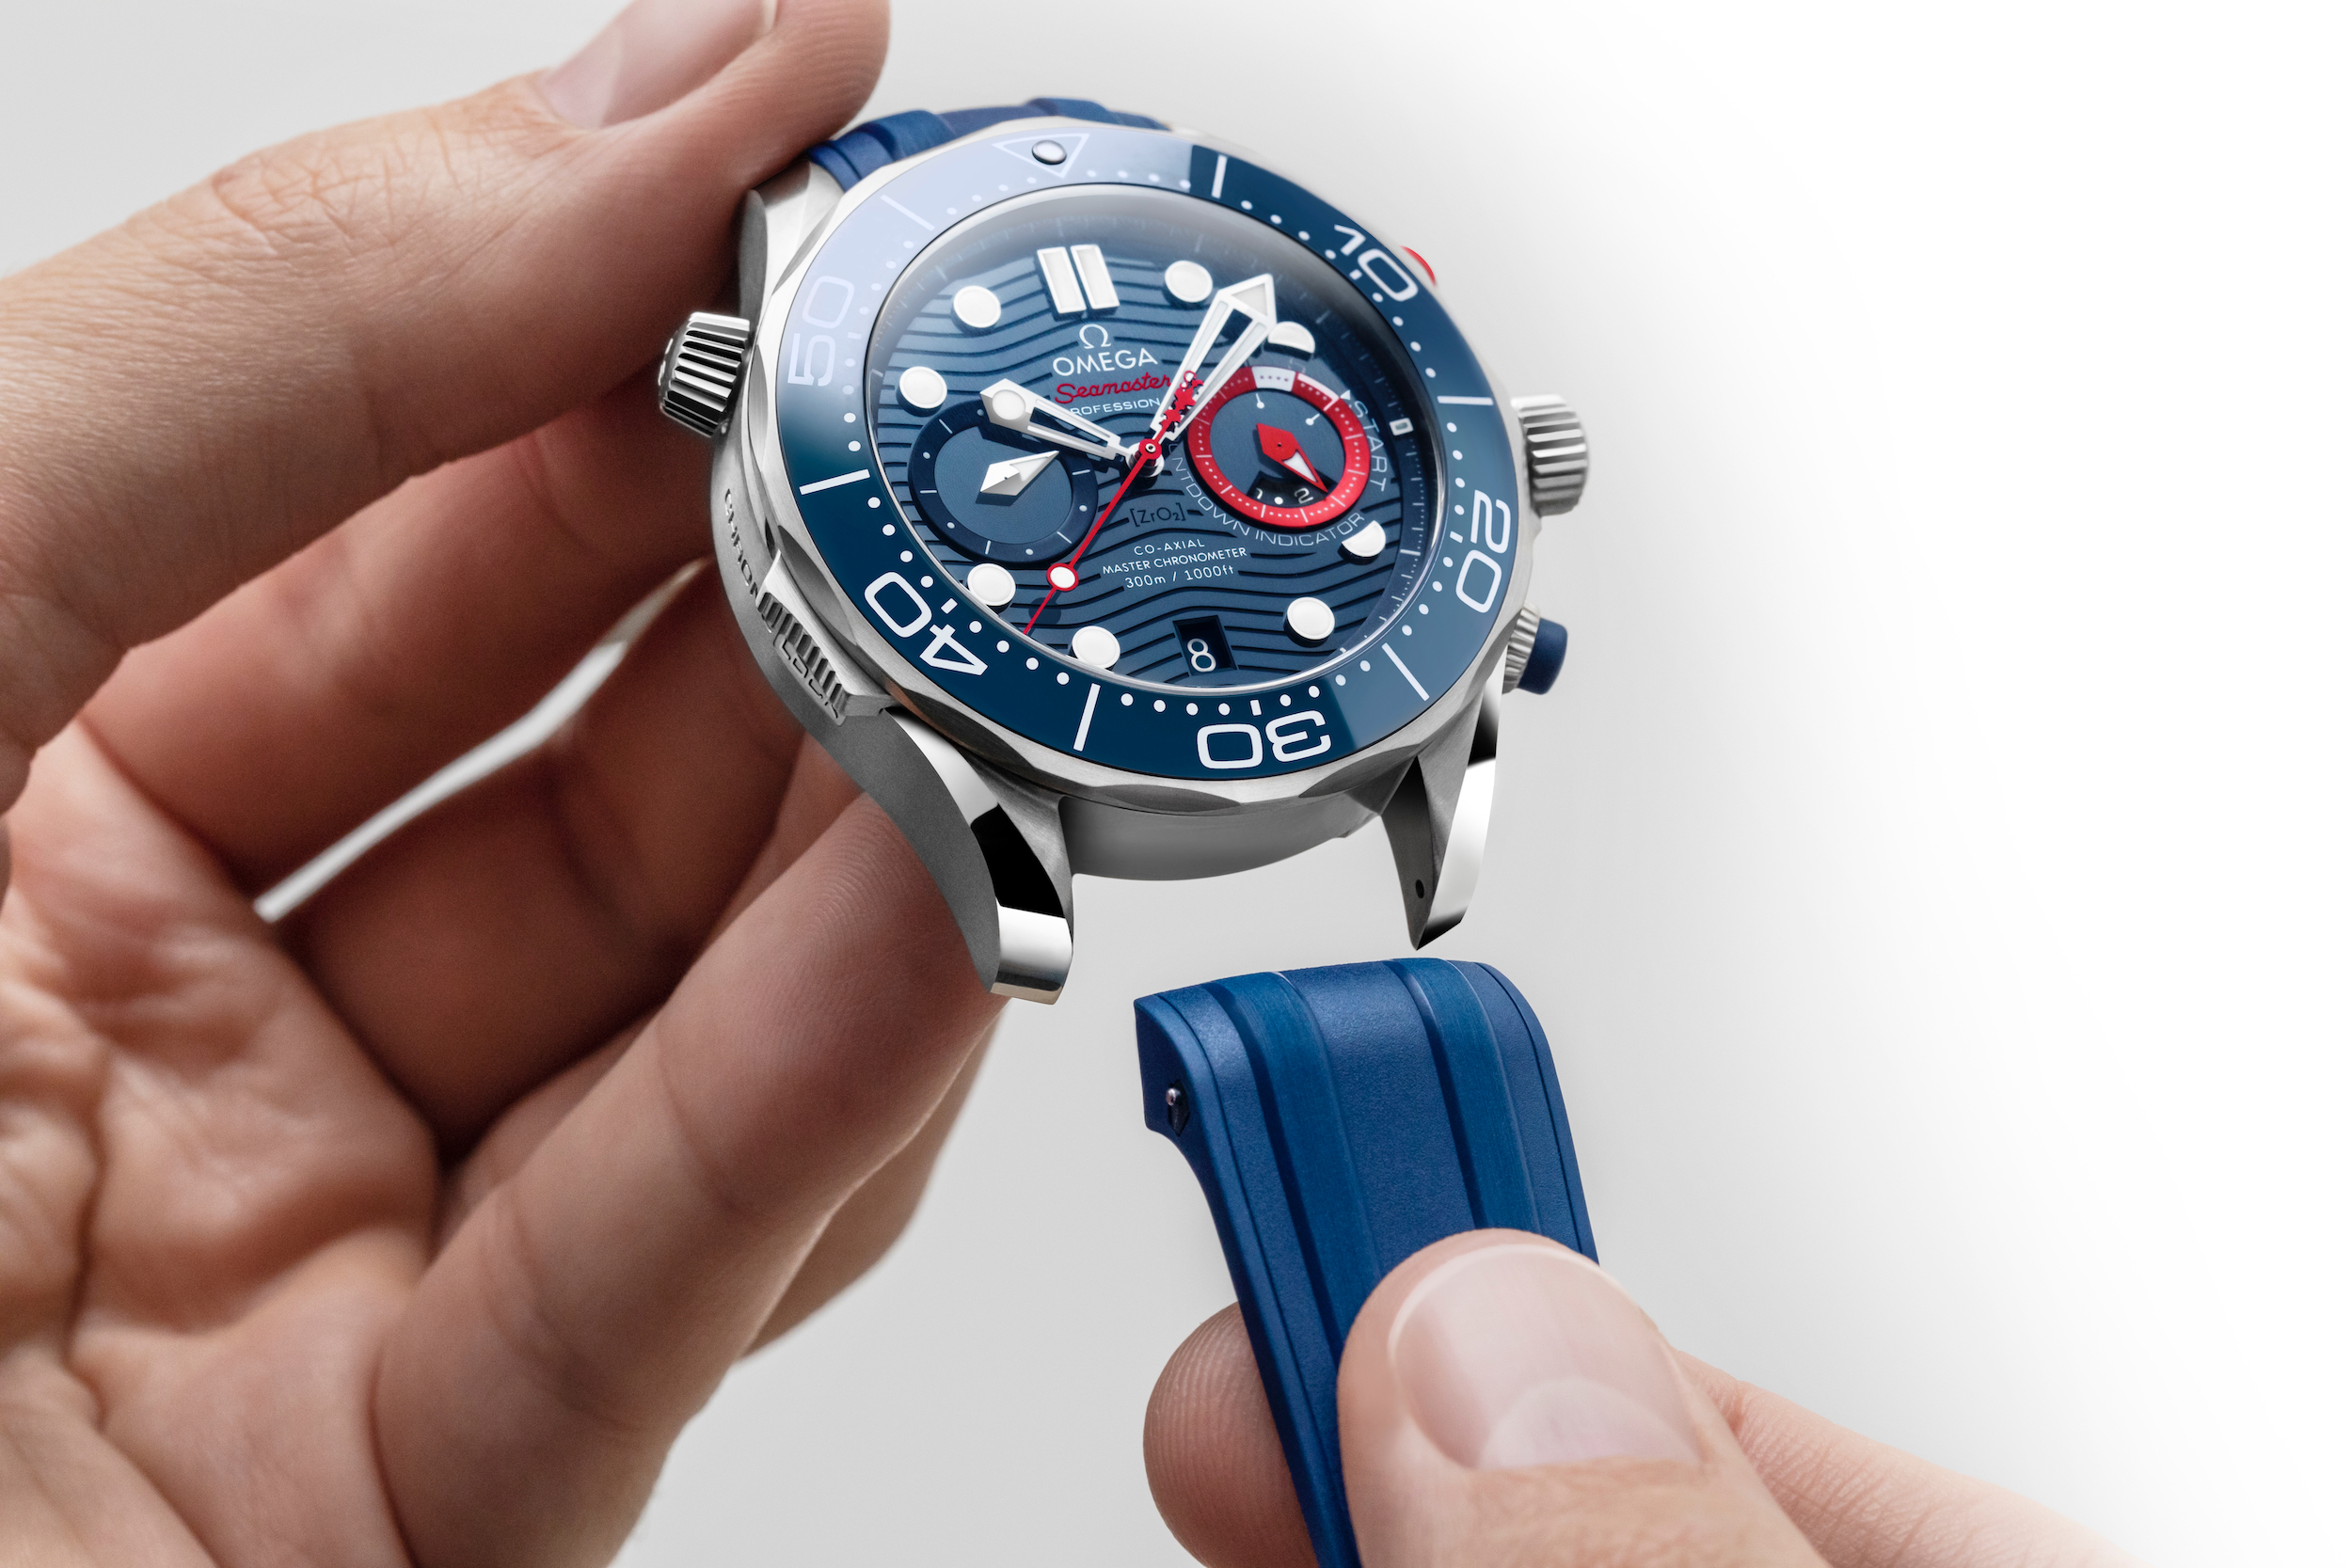 omega seamaster chronograph america's cup limited edition